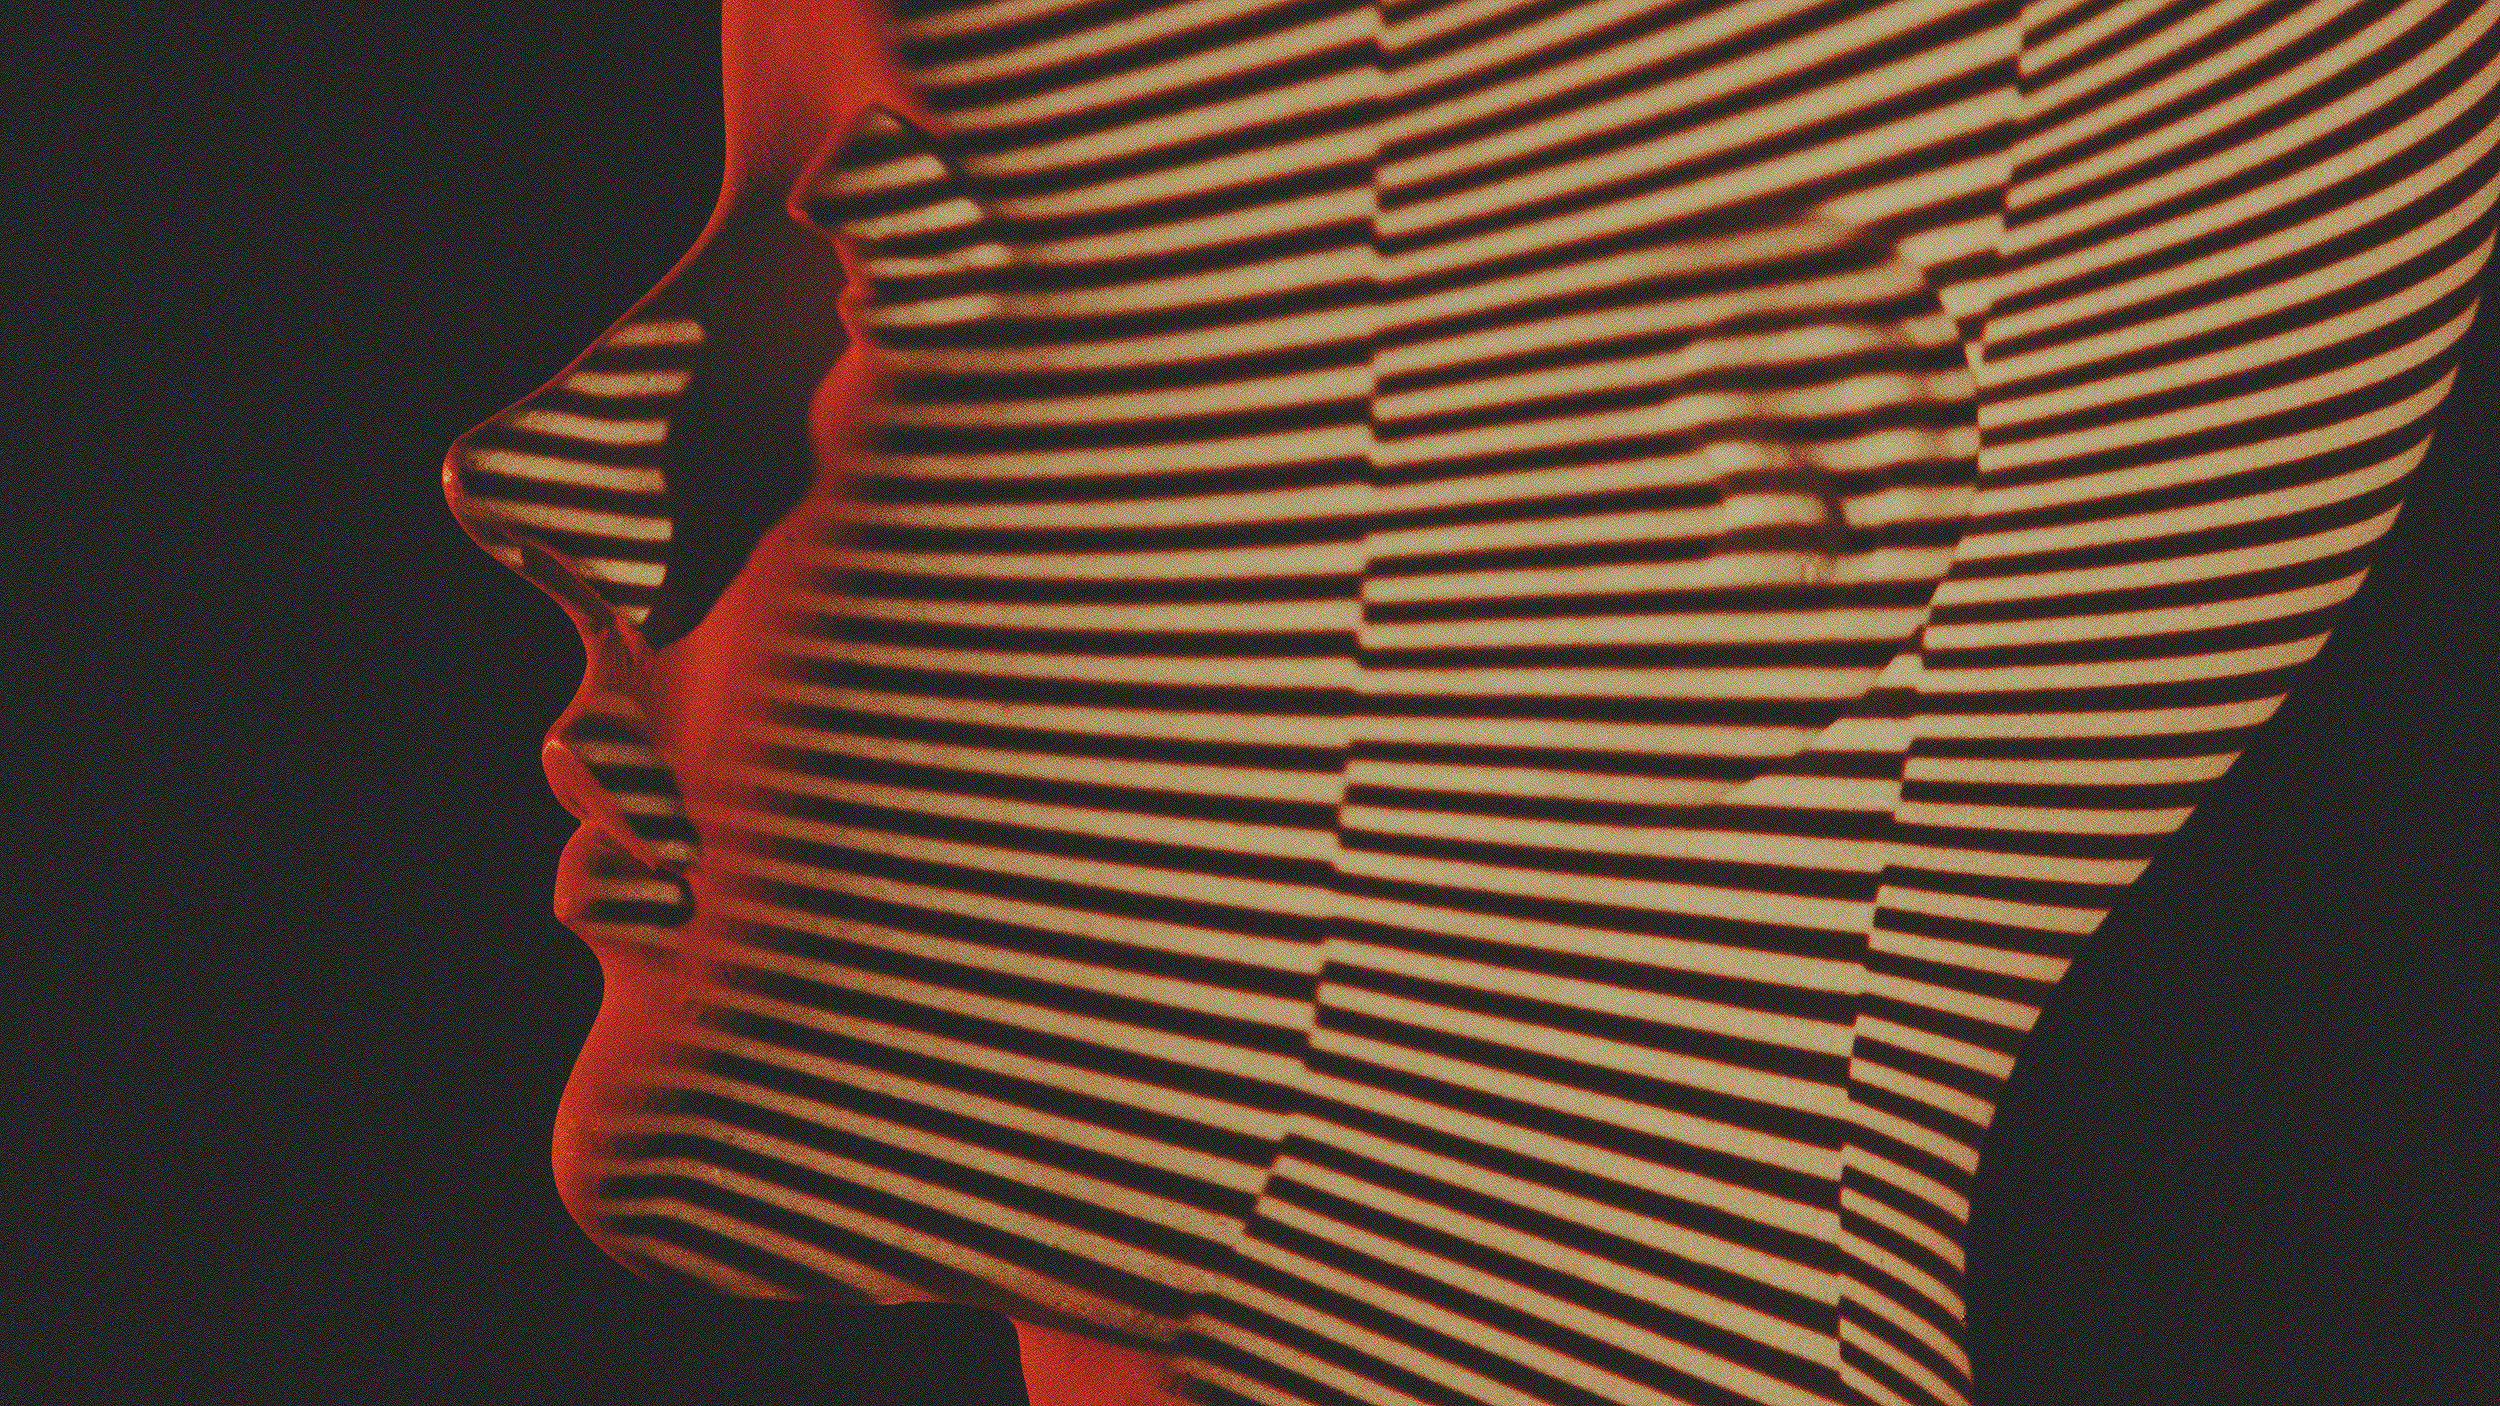 Profile of a person's face with science fiction inspired shadow stripes pattern projected onto it, against a dark background.